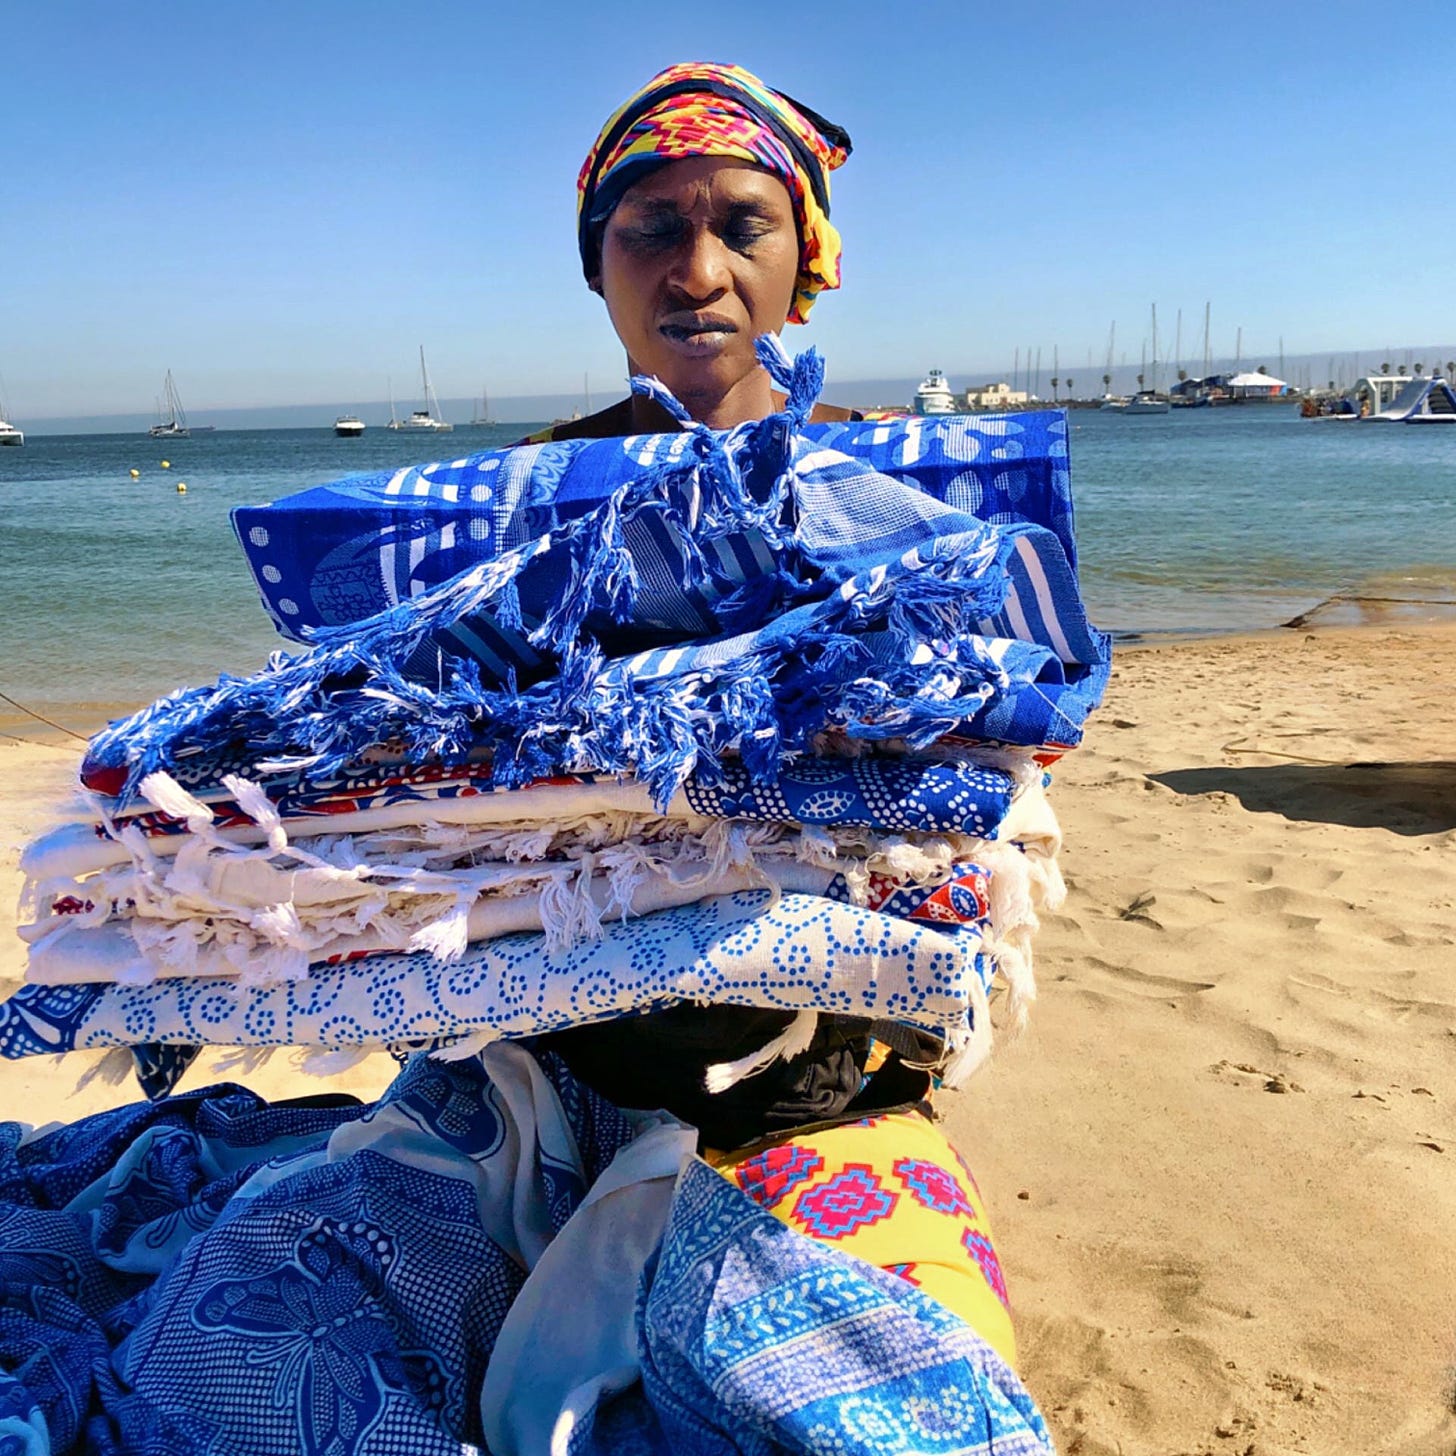 A beach vendor with a variety of blankets, creating a vibrant display.